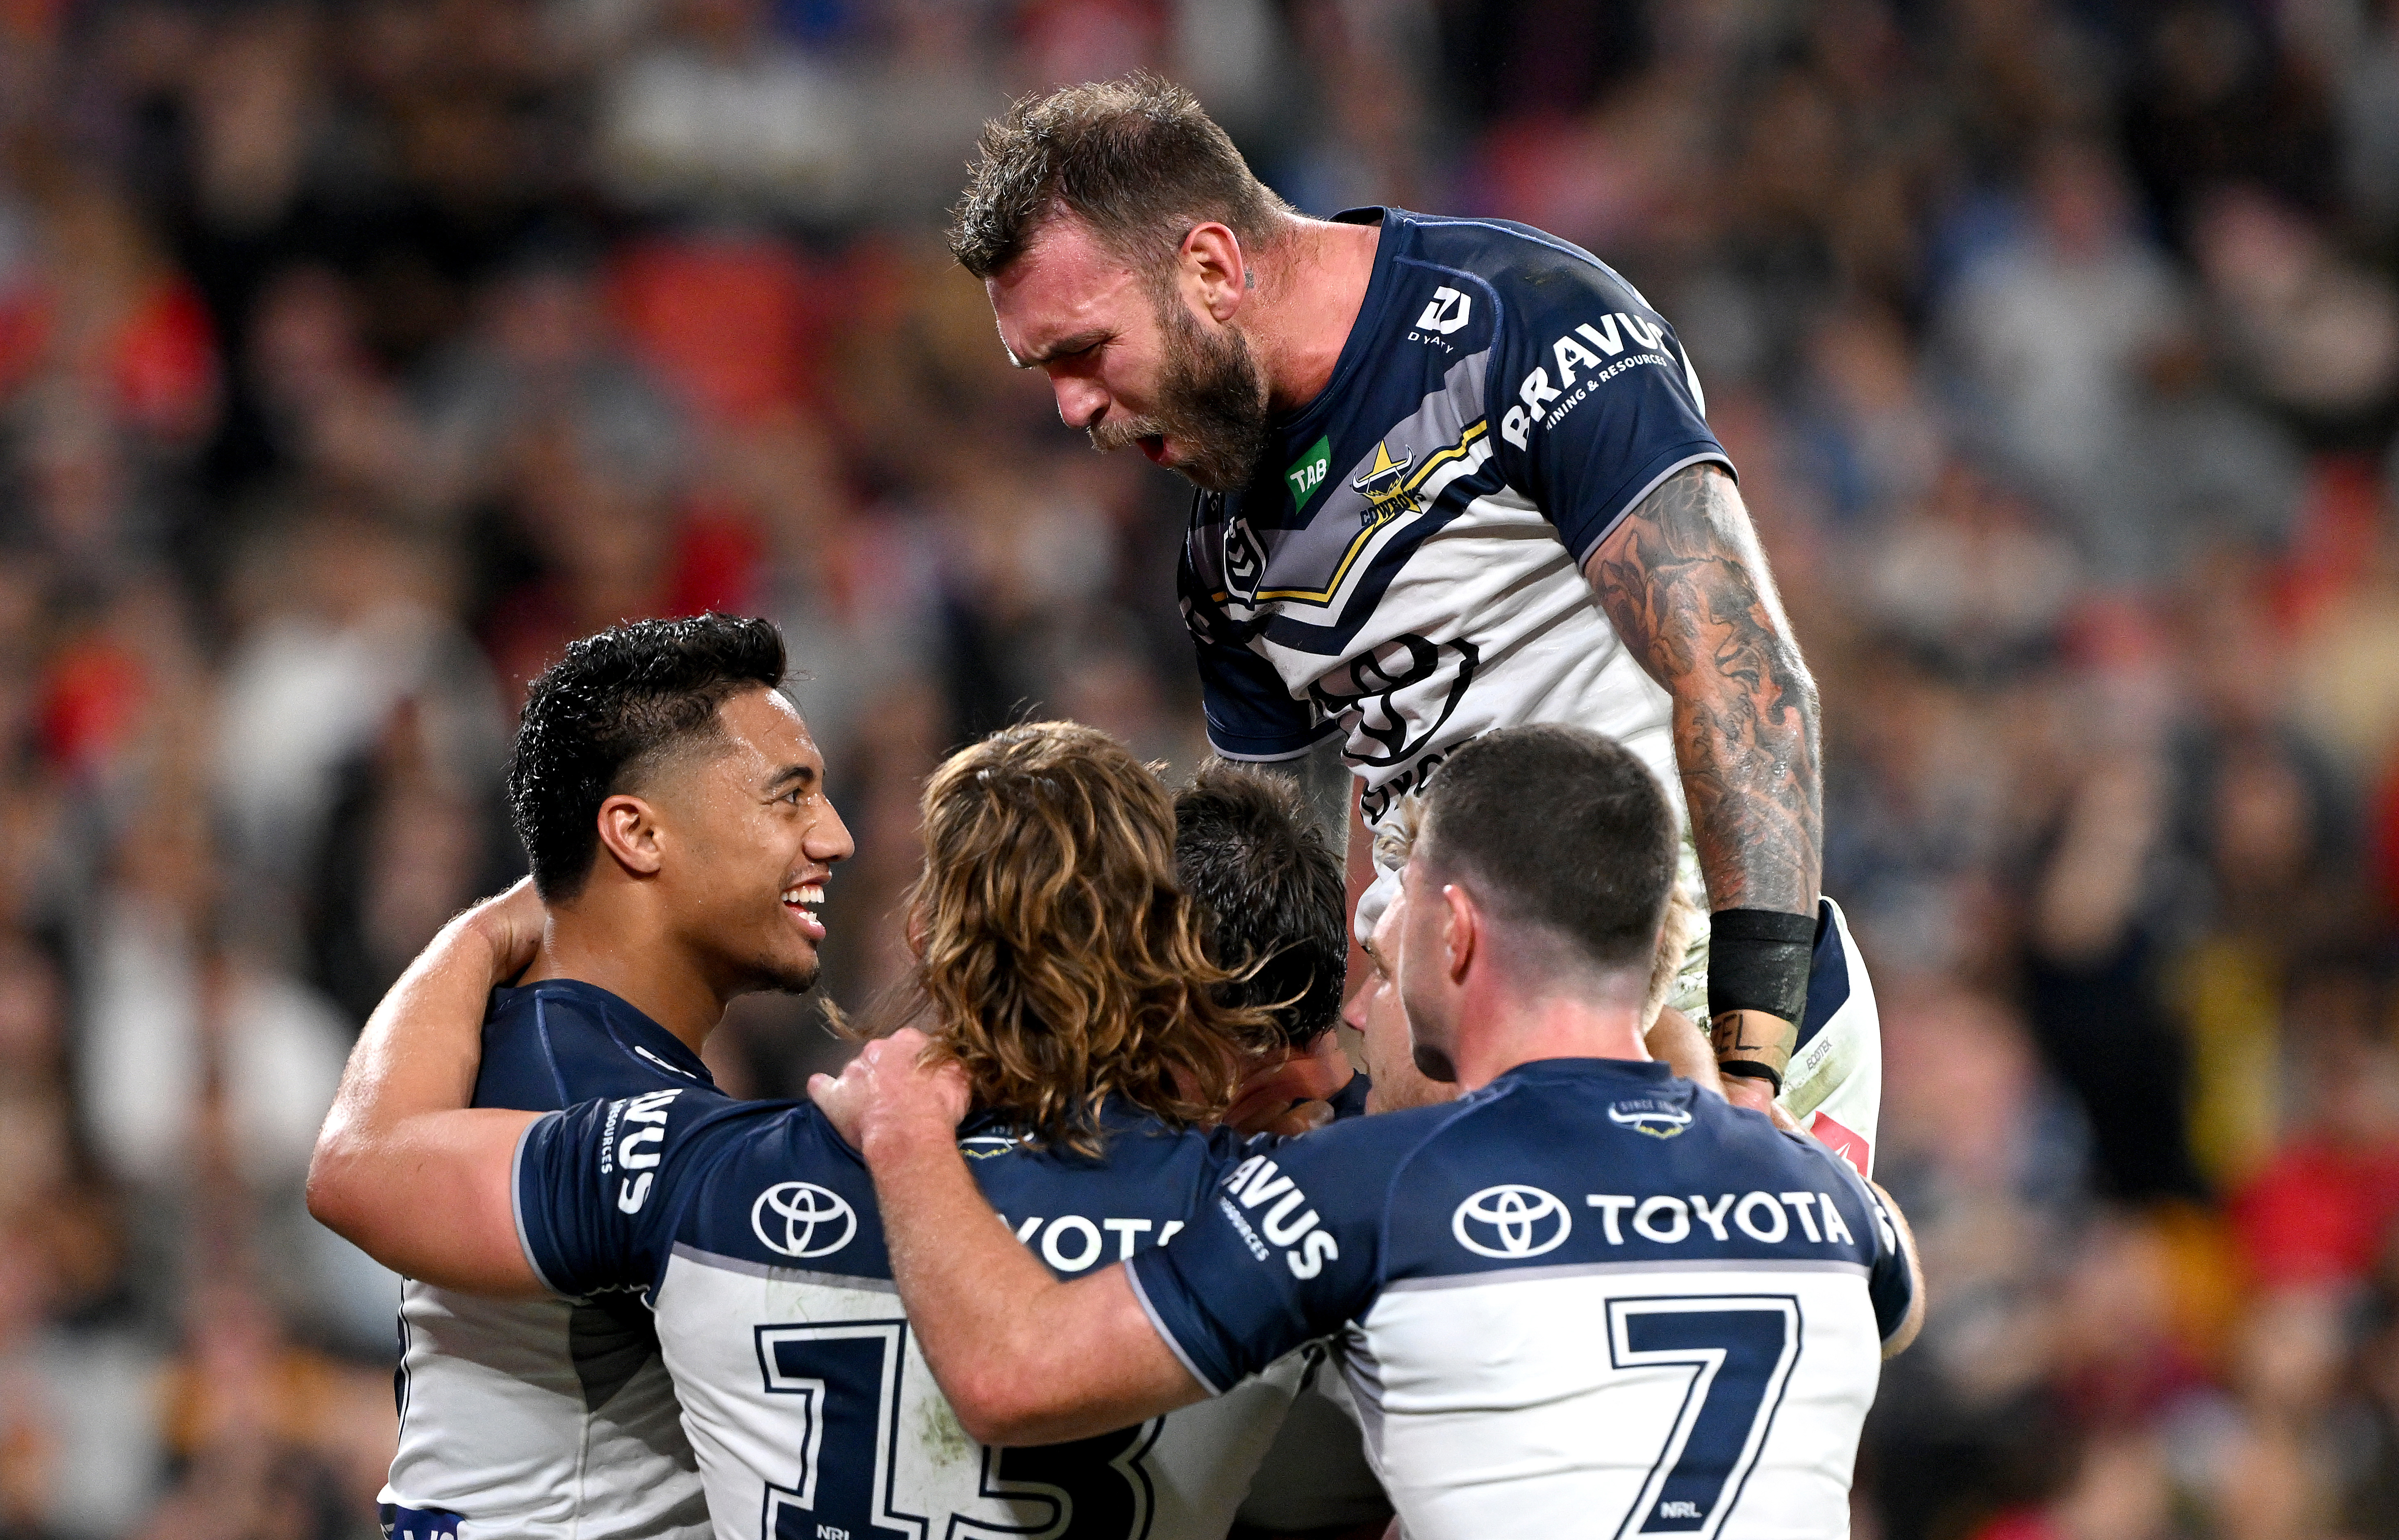 Scott Drinkwater of the Cowboys is congratulated by team mates after scoring a try during the round 26 NRL match between Dolphins and North Queensland Cowboys at Suncorp Stadium on August 25, 2023 in Brisbane, Australia. (Photo by Bradley Kanaris/Getty Images)